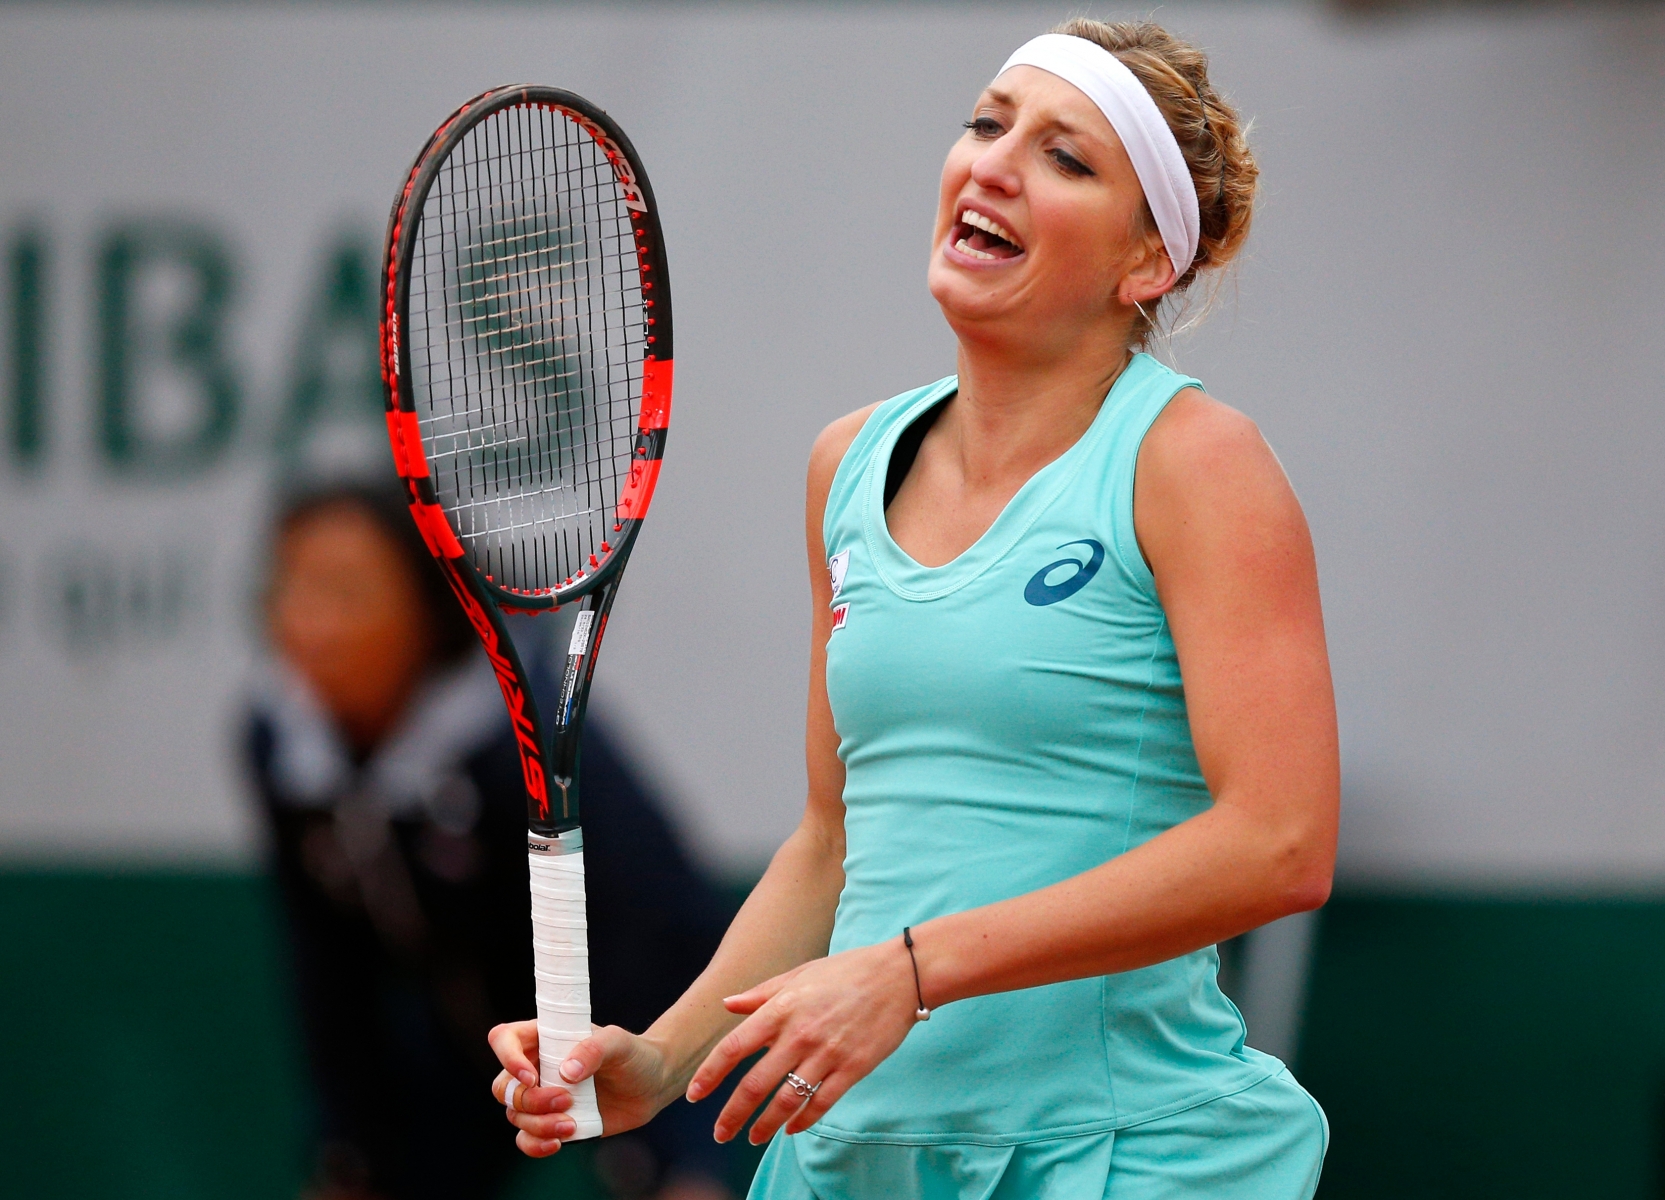 Timea Bacsinszky of Switzerland reacts as she plays Netherlands' Kiki Bertens during their quarterfinal match of the French Open tennis tournament at the Roland Garros stadium, Thursday, June 2, 2016 in Paris.  (AP Photo/Christophe Ena) France Tennis French Open